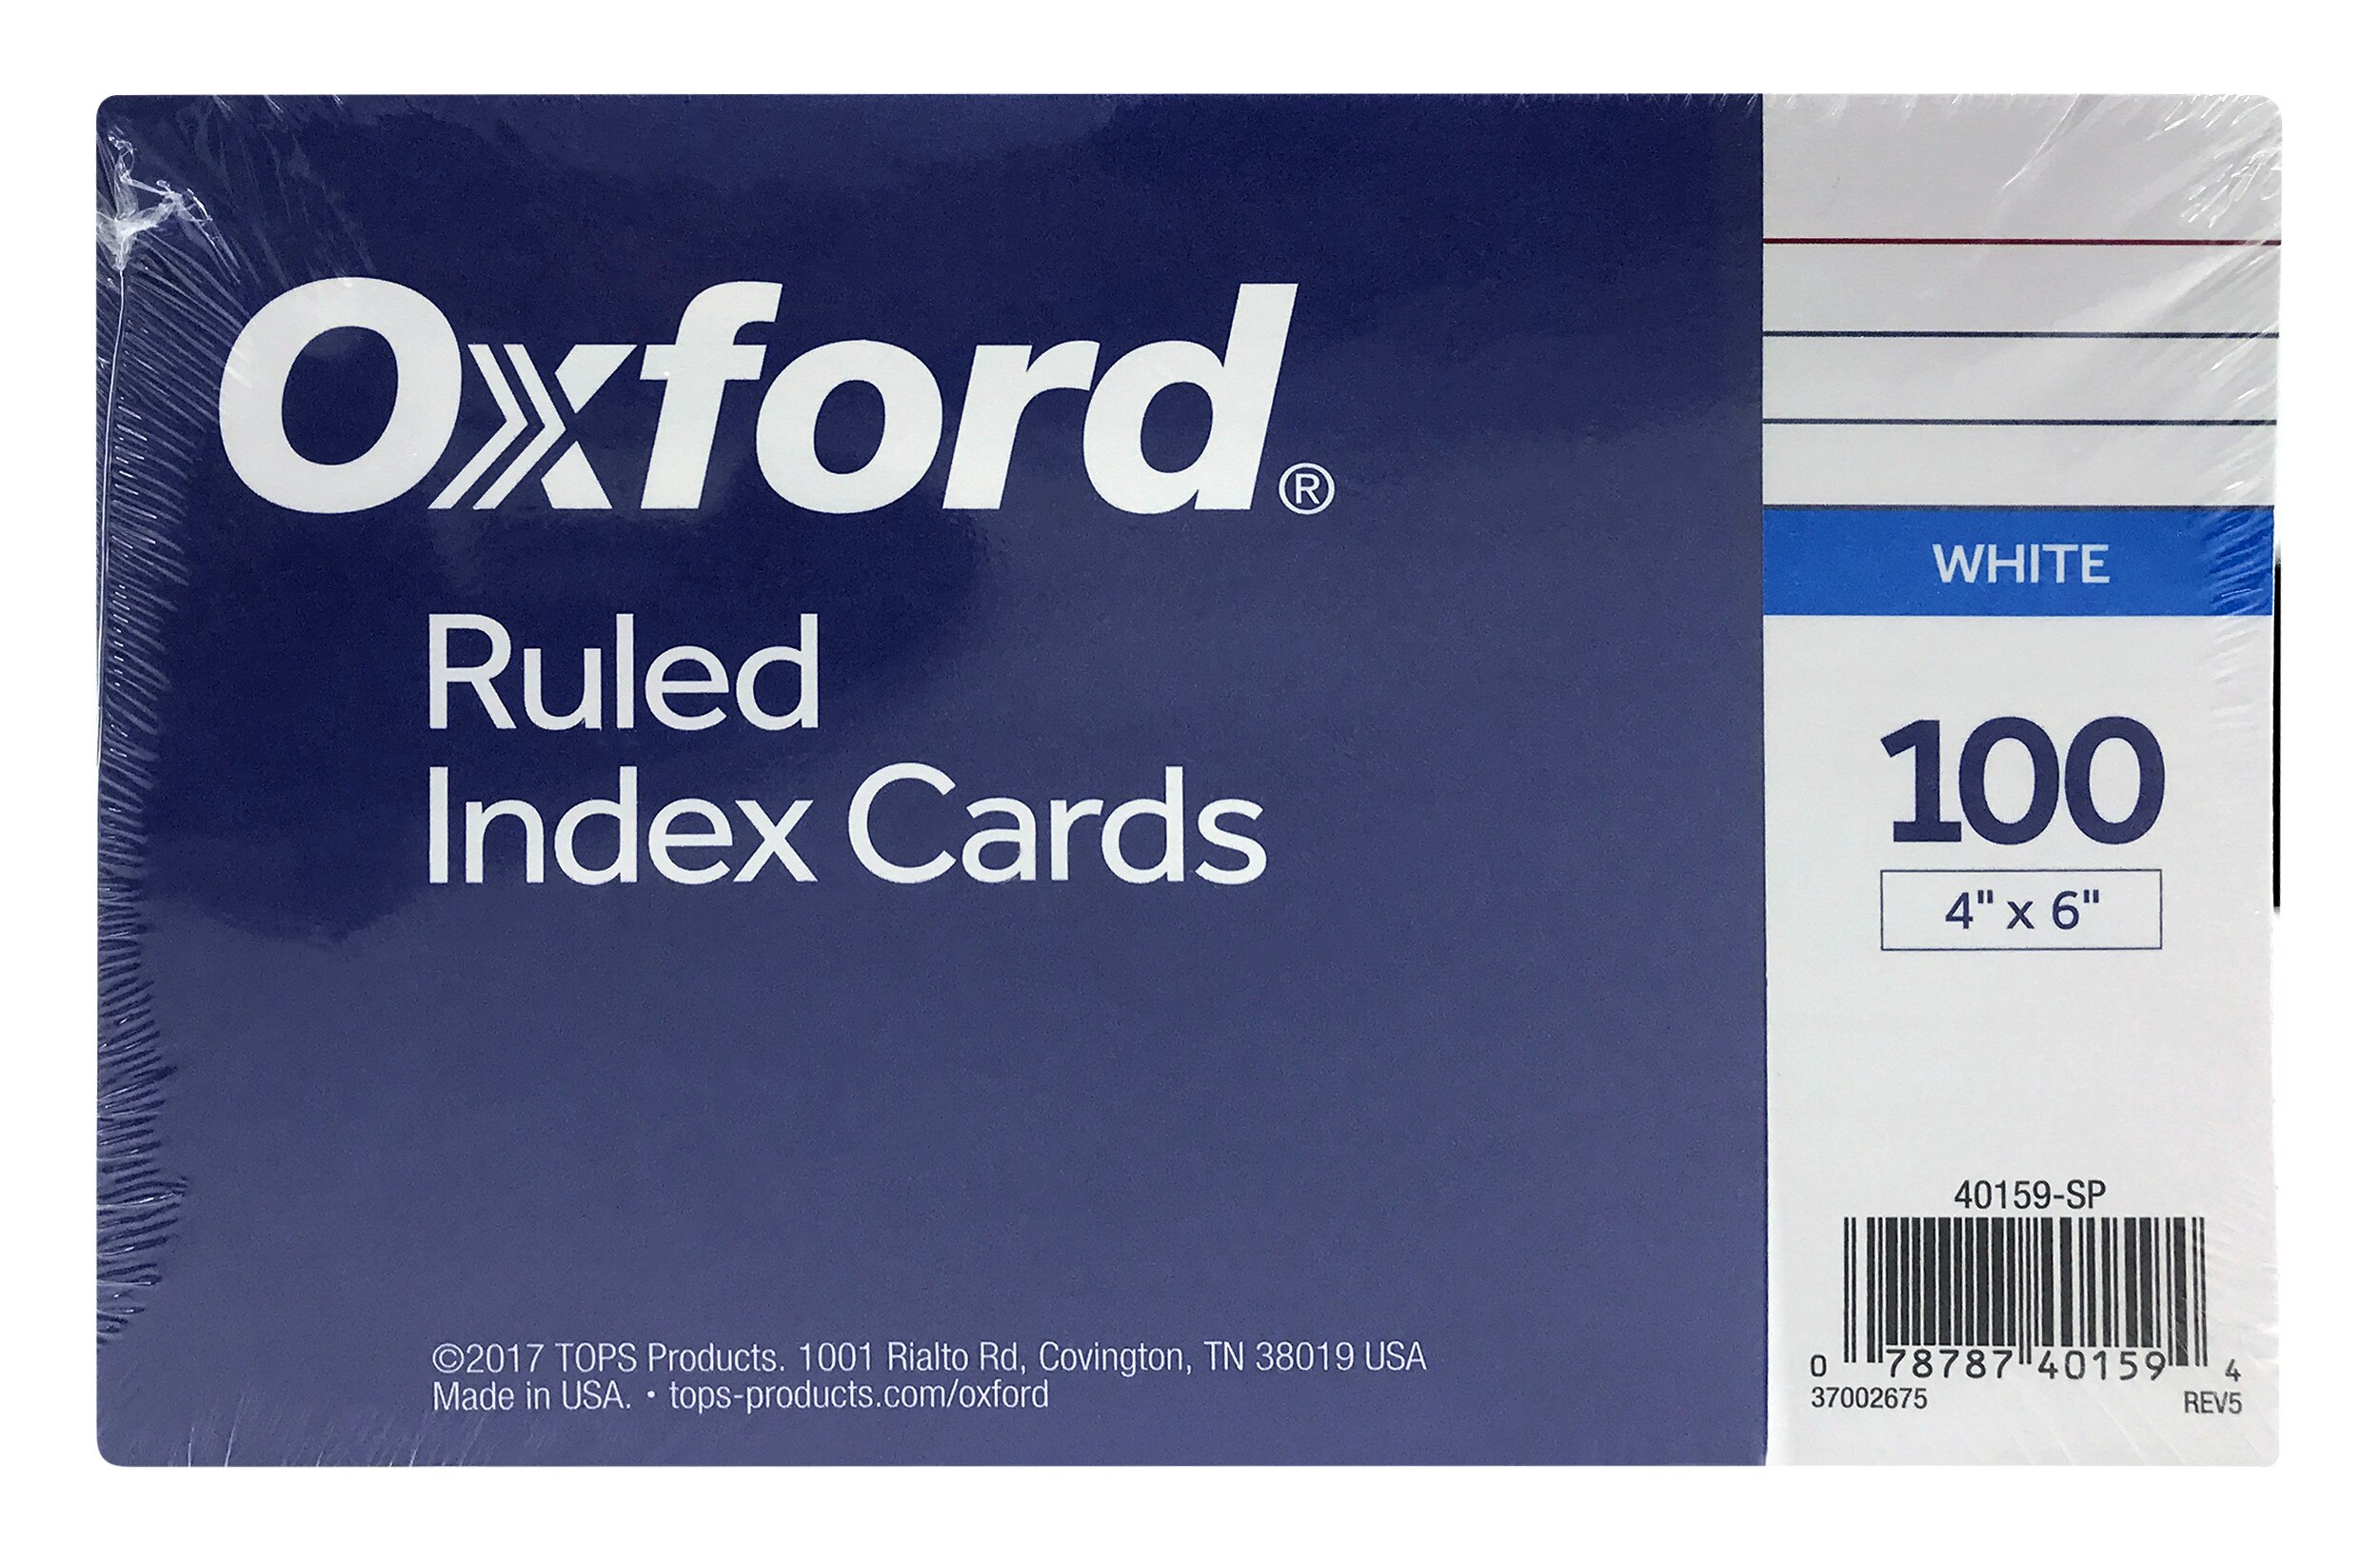 Oxford 4 inch x 6 inch Ruled White Index Cards